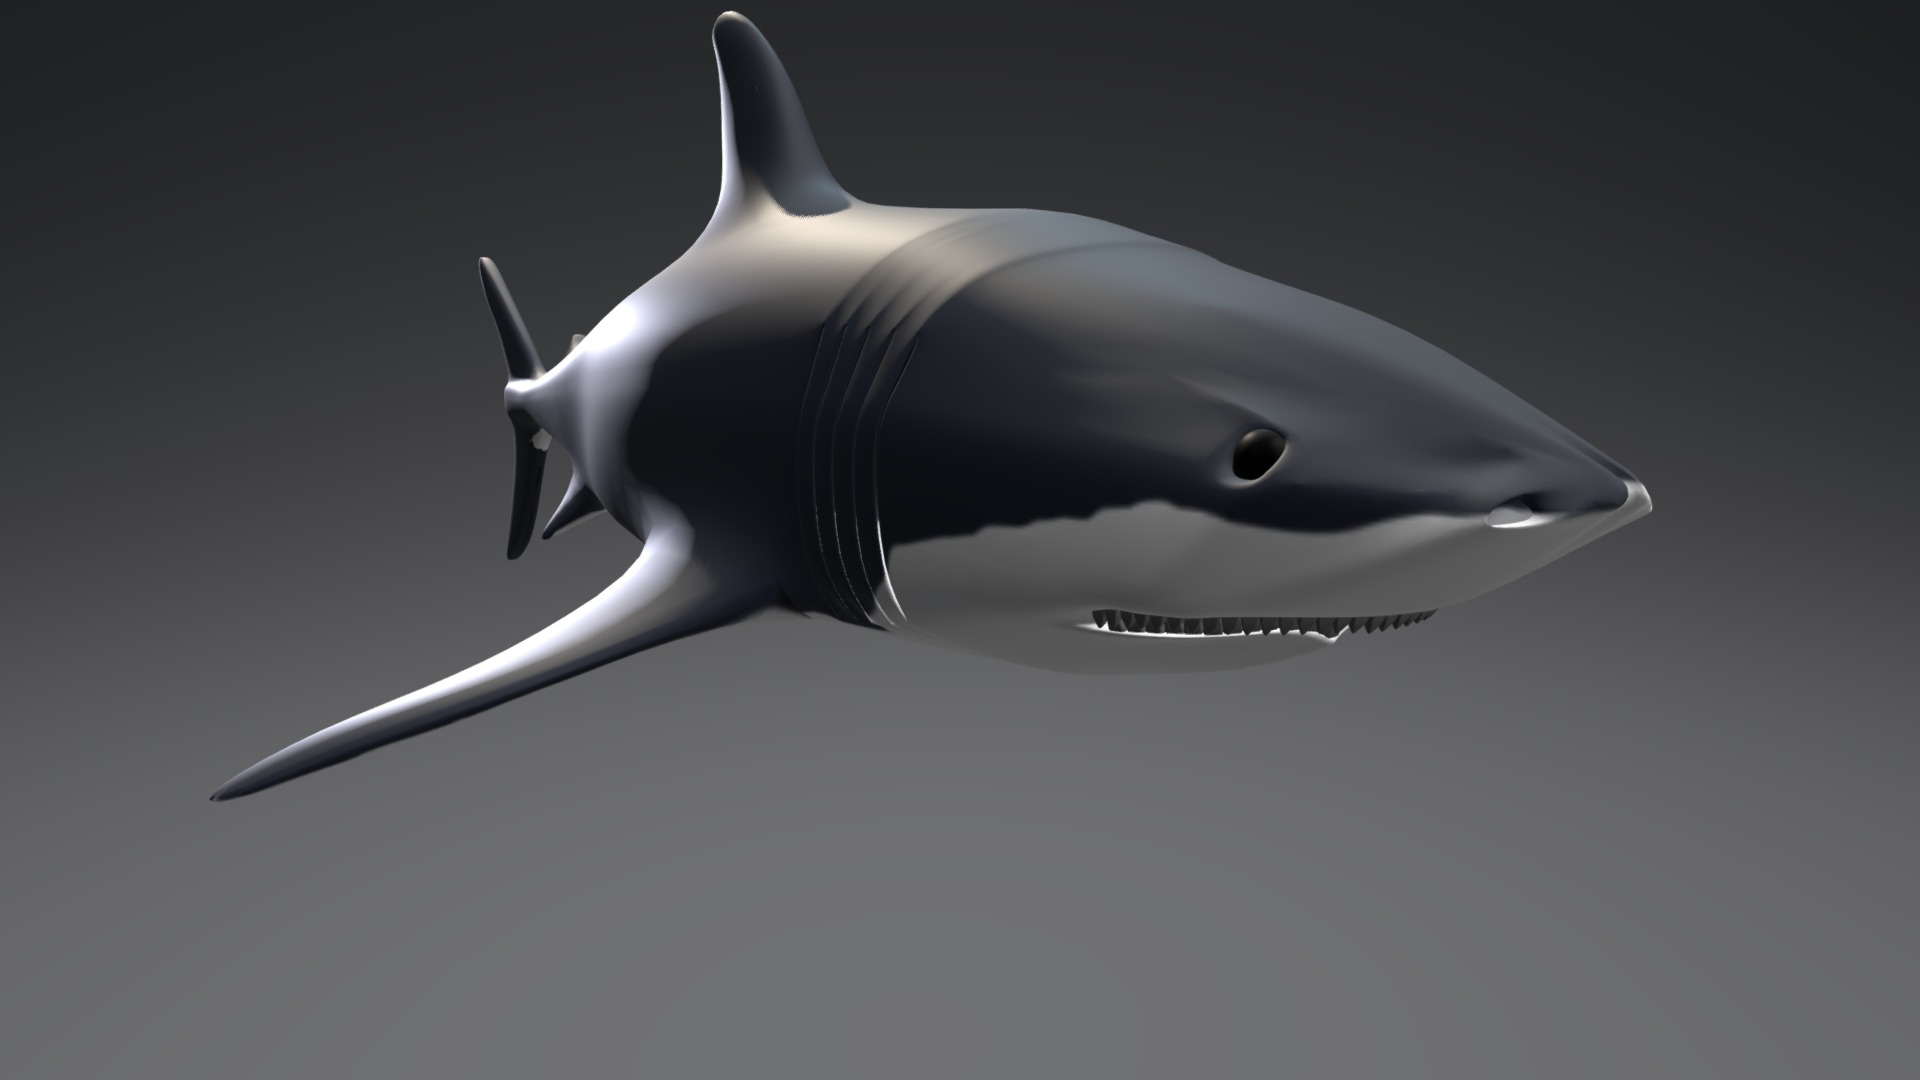 3D model shark - This is a 3D model of the shark. The 3D model is about a shark swimming underwater.